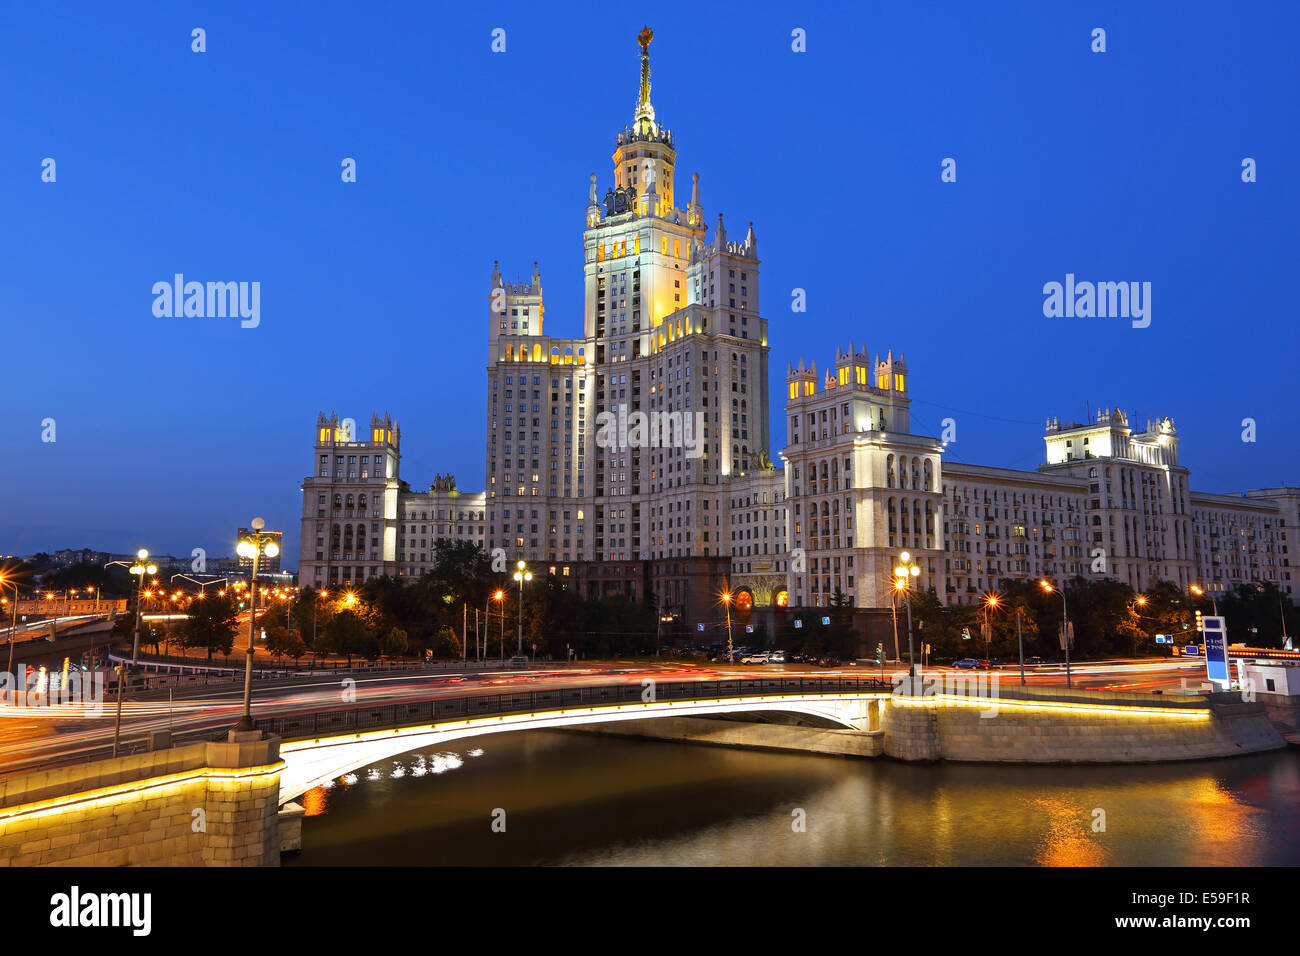 High-rise building on Kotelnicheskaya embankment in Moscow at night, Russia. Stock Photo